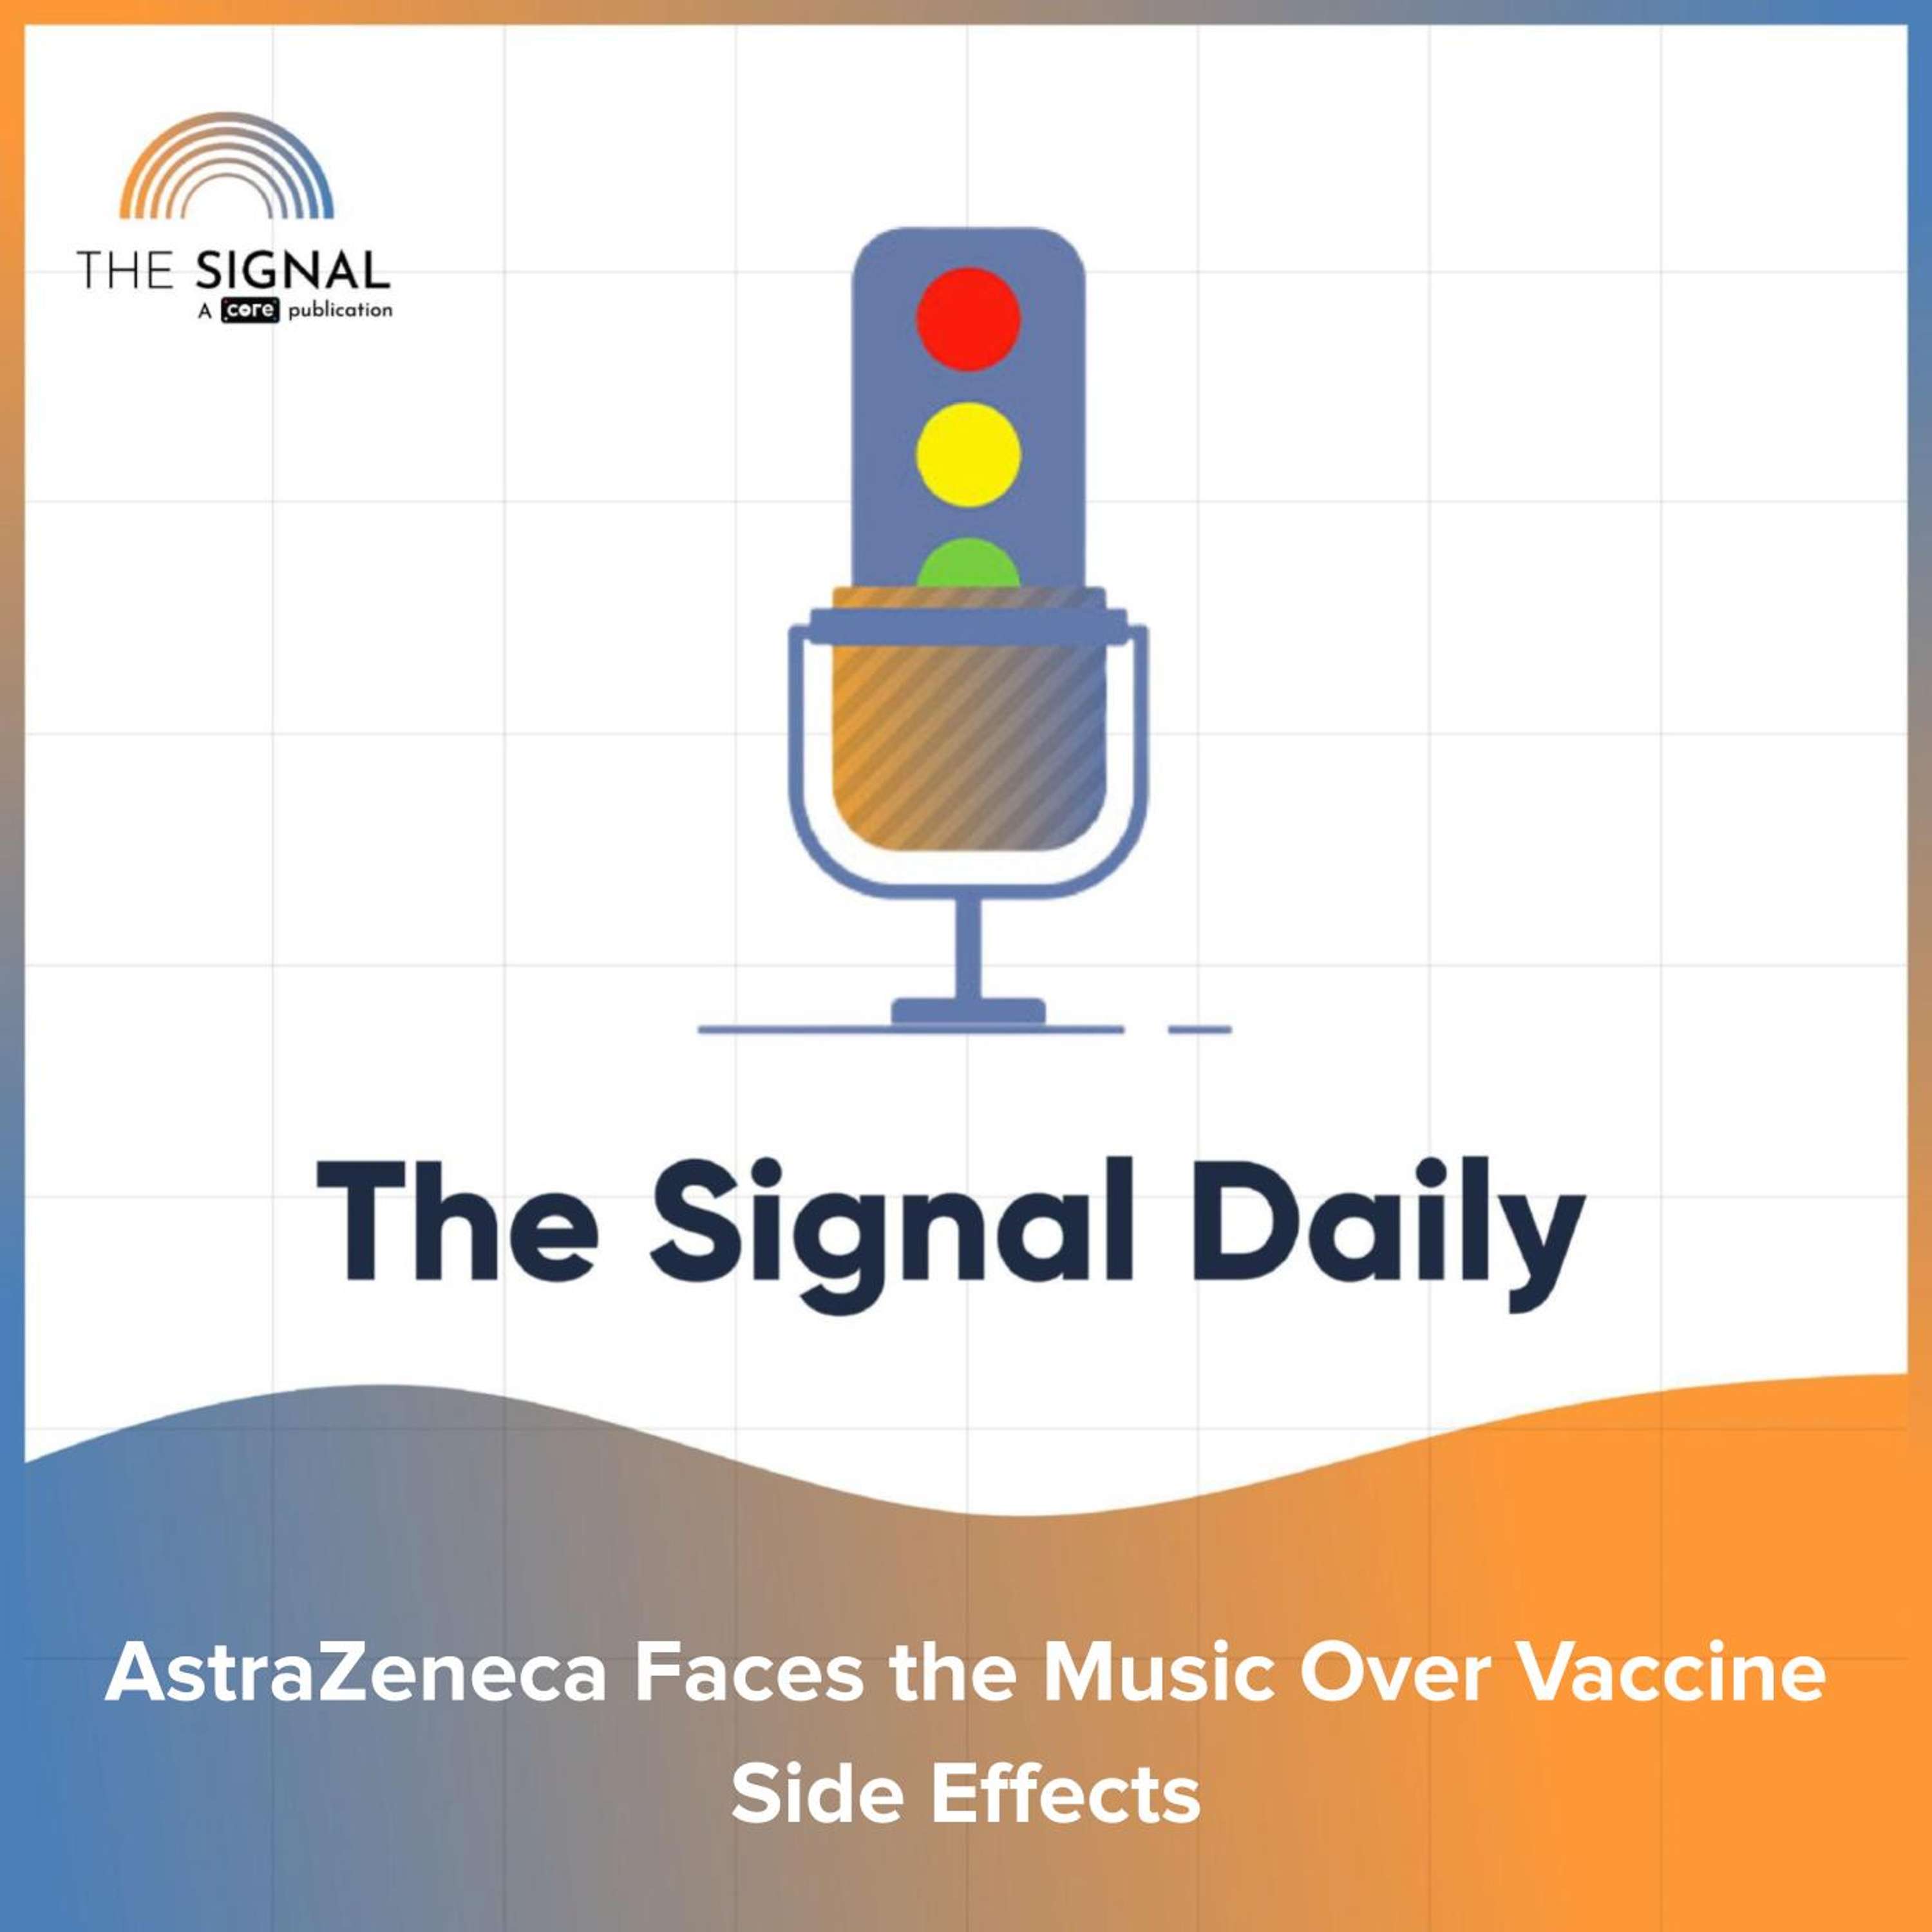 AstraZeneca Faces the Music Over Vaccine Side Effects